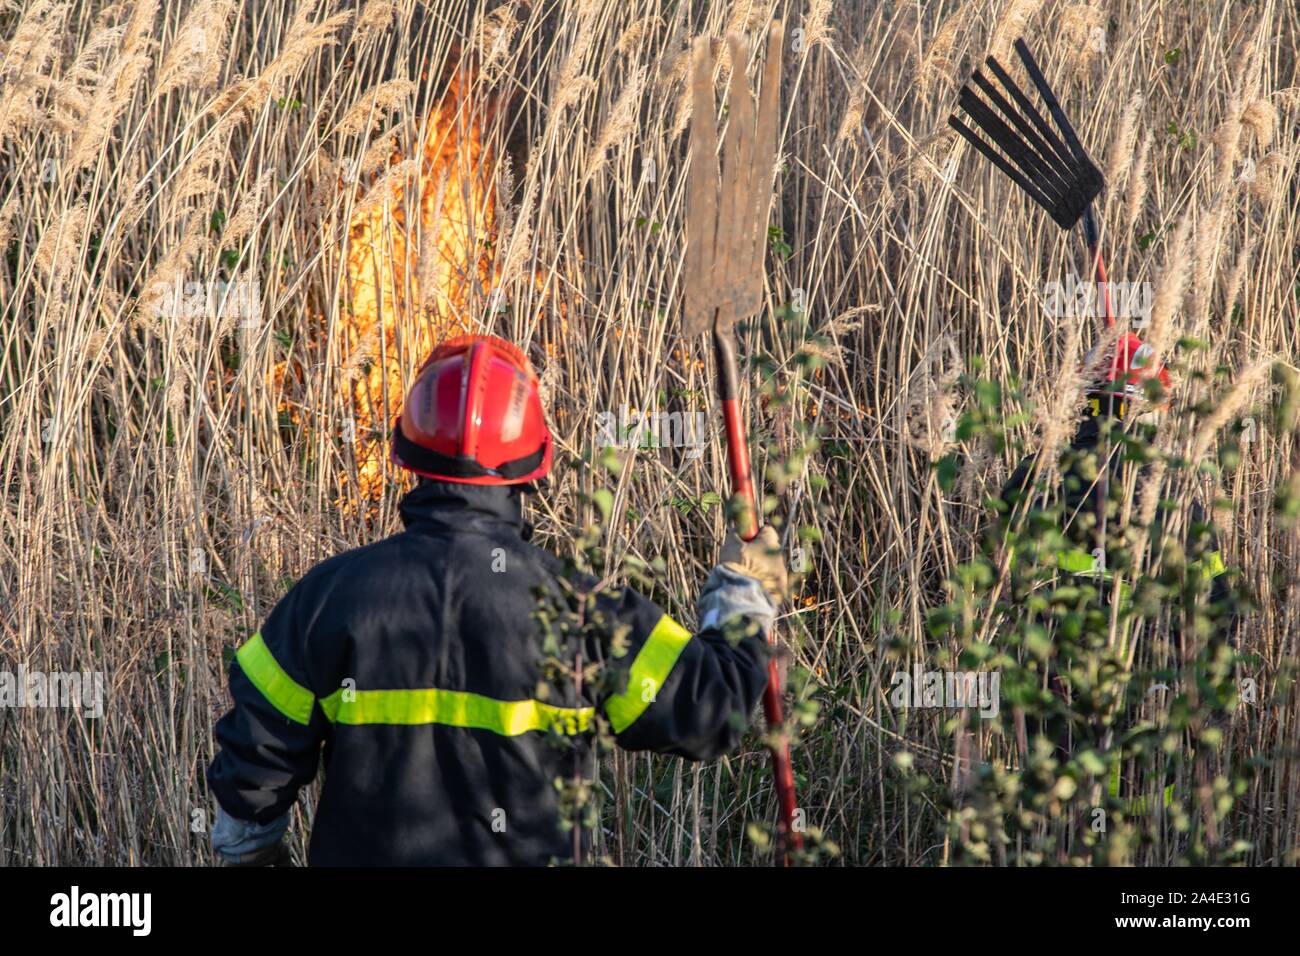 FIREFIGHTER EXTINGUISHING A BRUSH FIRE (REEDS) WITH FIRE BEATERS, FIREFIGHTERS FROM THE EMERGENCY SERVICES CENTER OF CHAMBERY, LES MARCHES, SAVOY (73), FRANCE Stock Photo